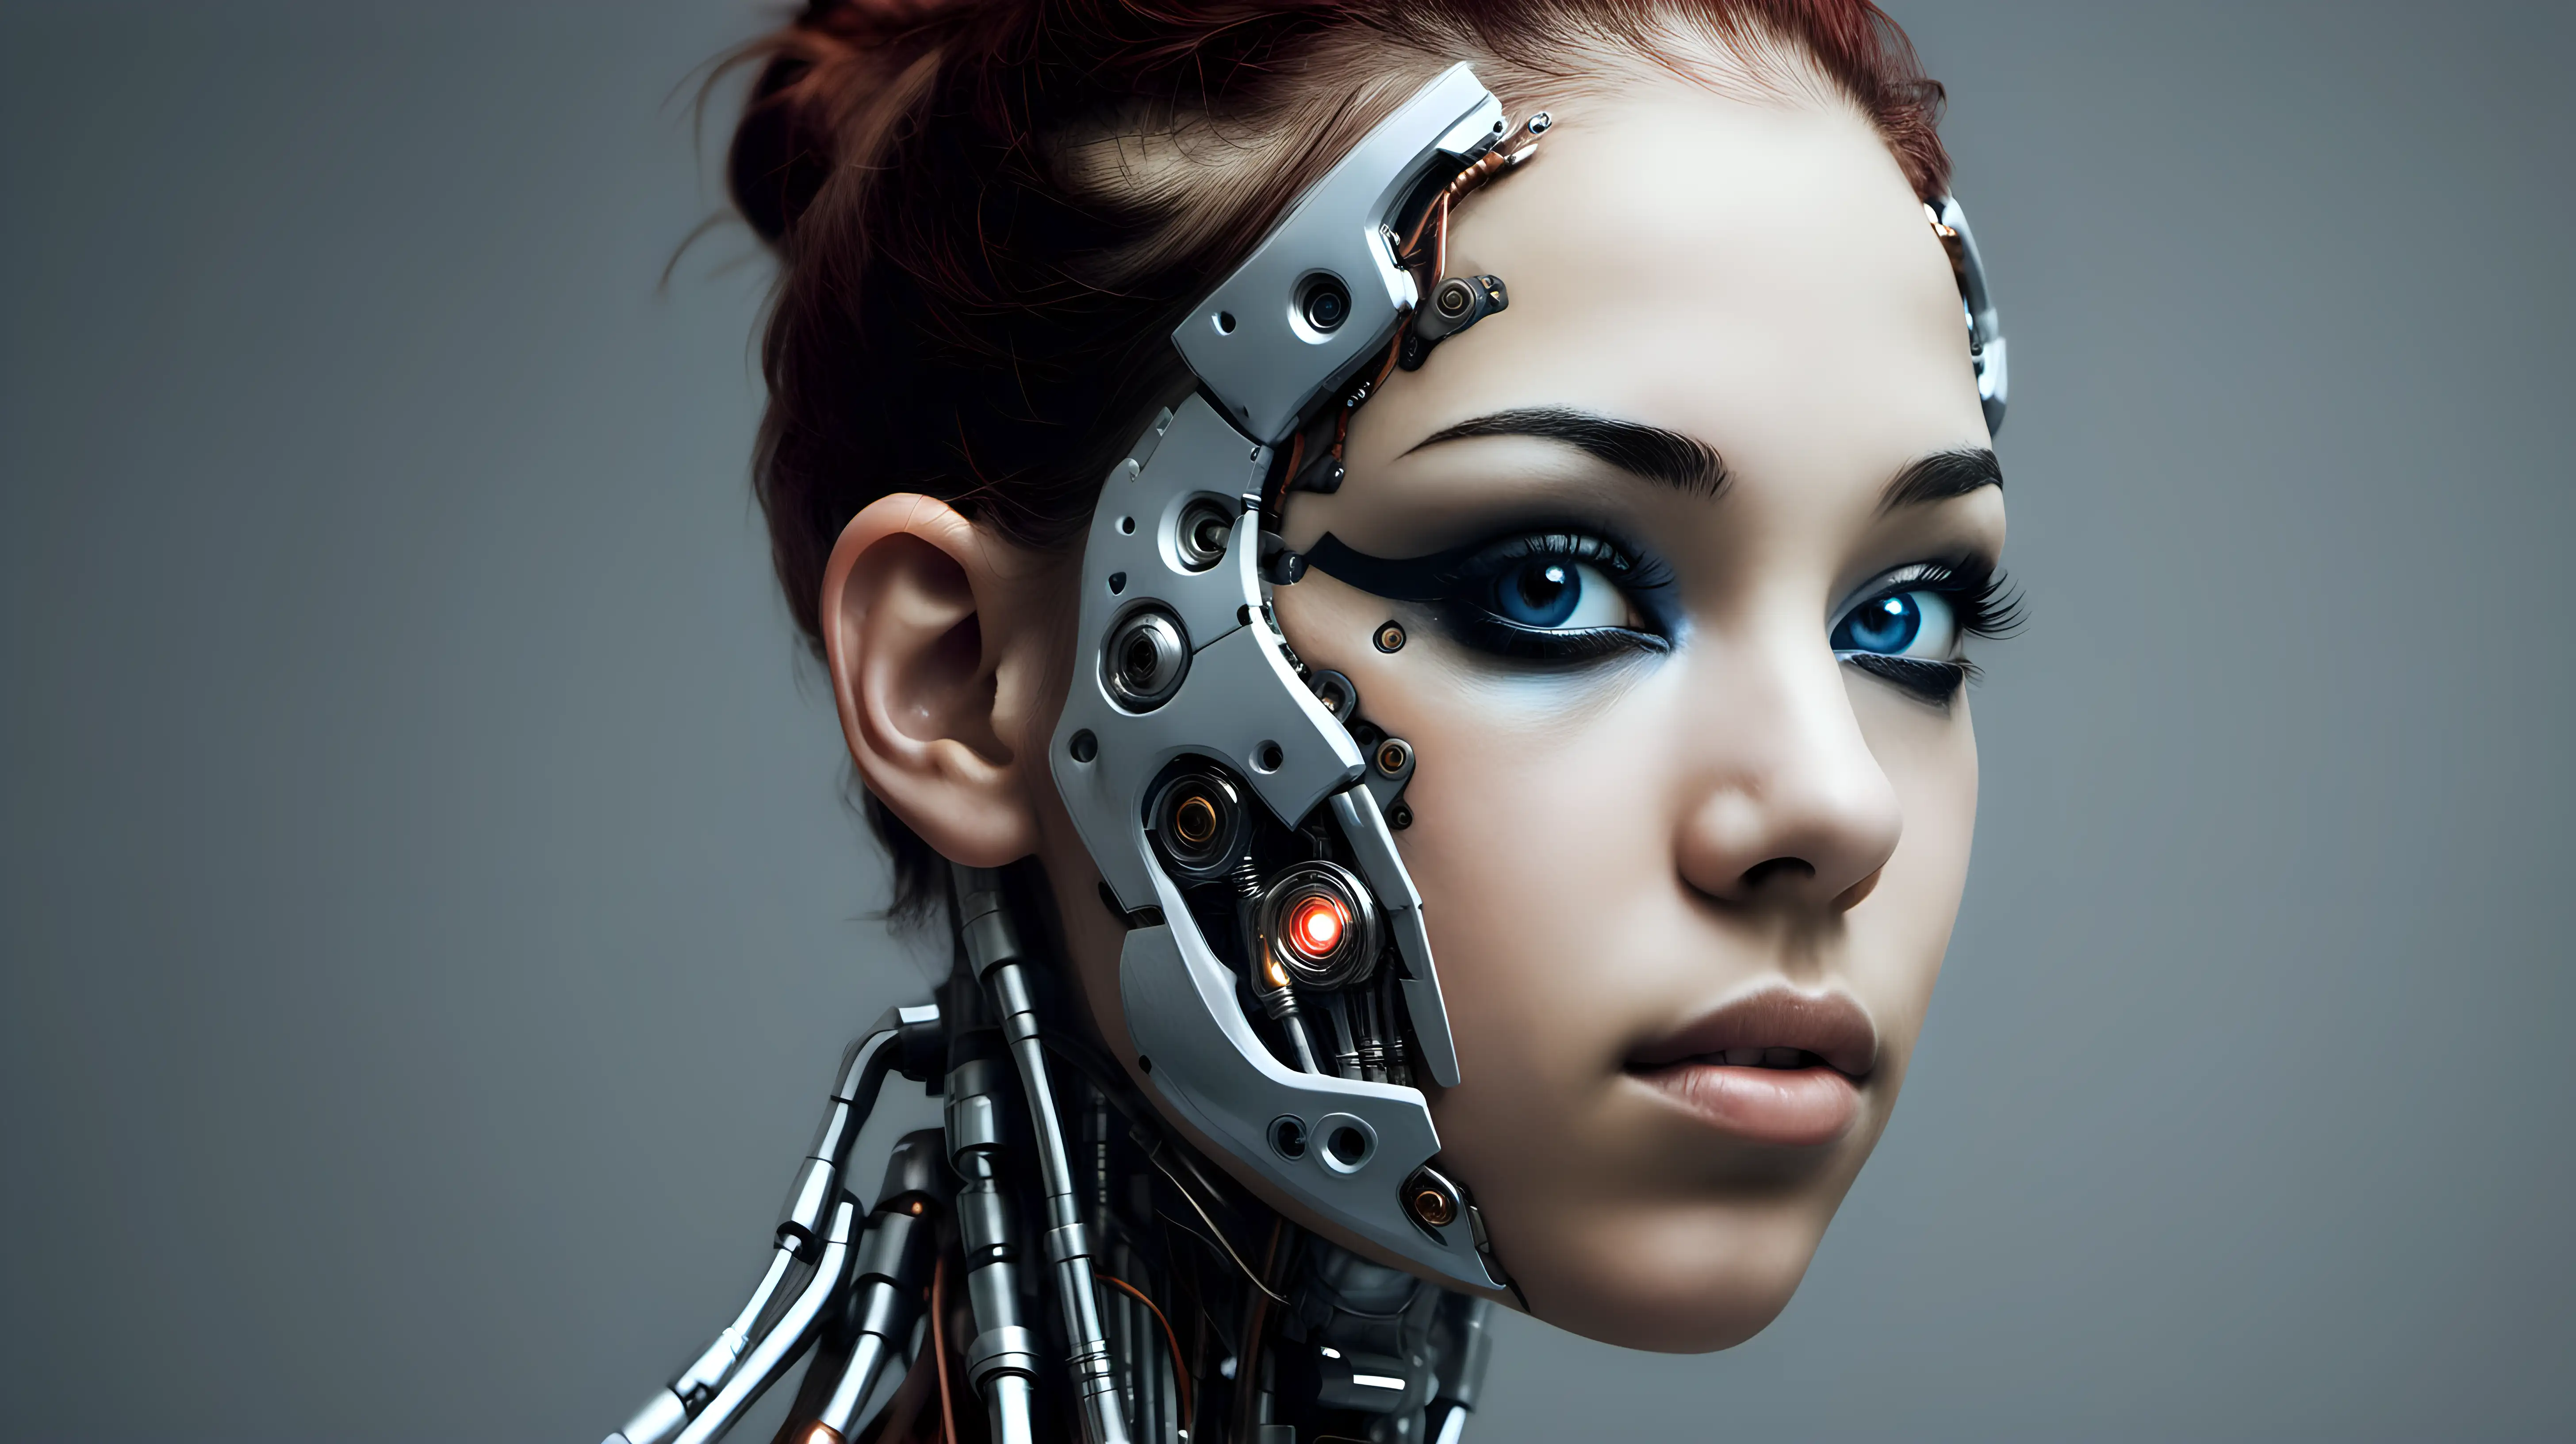 Beautiful Cyborg Woman with Stunning Cybernetic Features